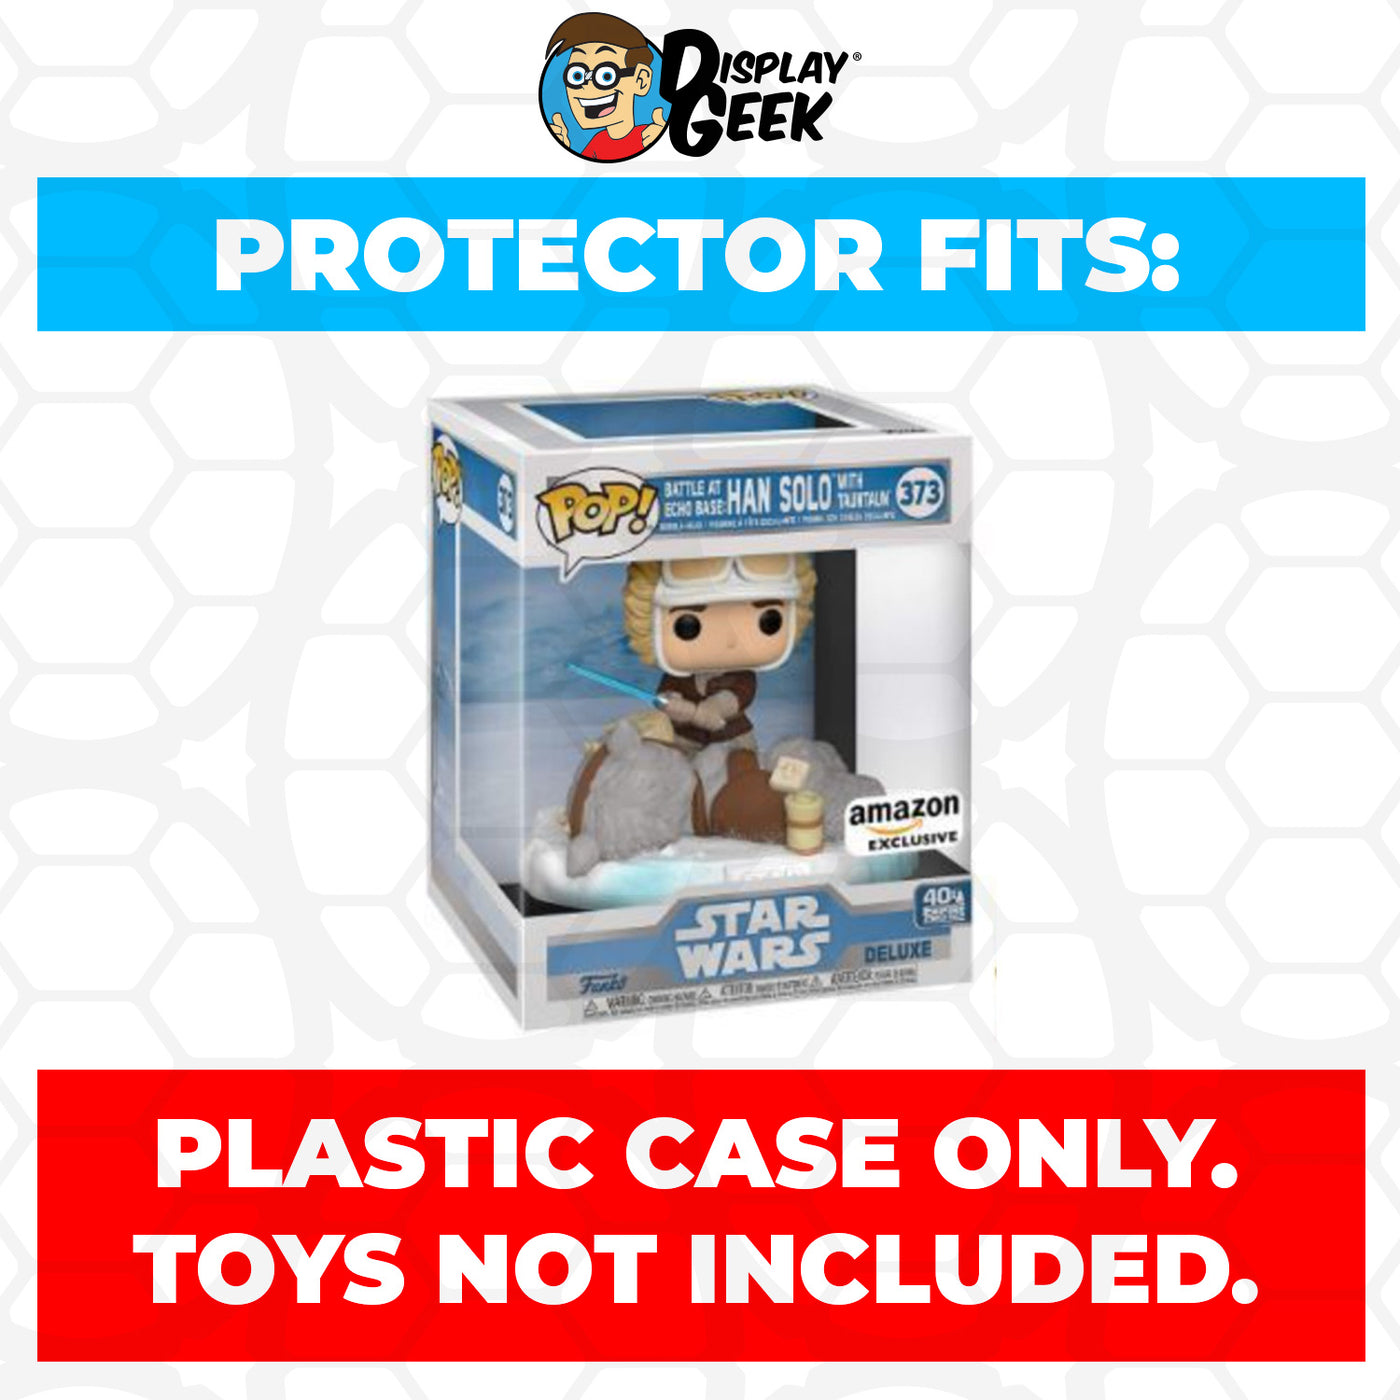 Pop Protector for Battle at Echo Base Han Solo TaunTaun #373 Funko Pop Deluxe on The Protector Guide App by Display Geek